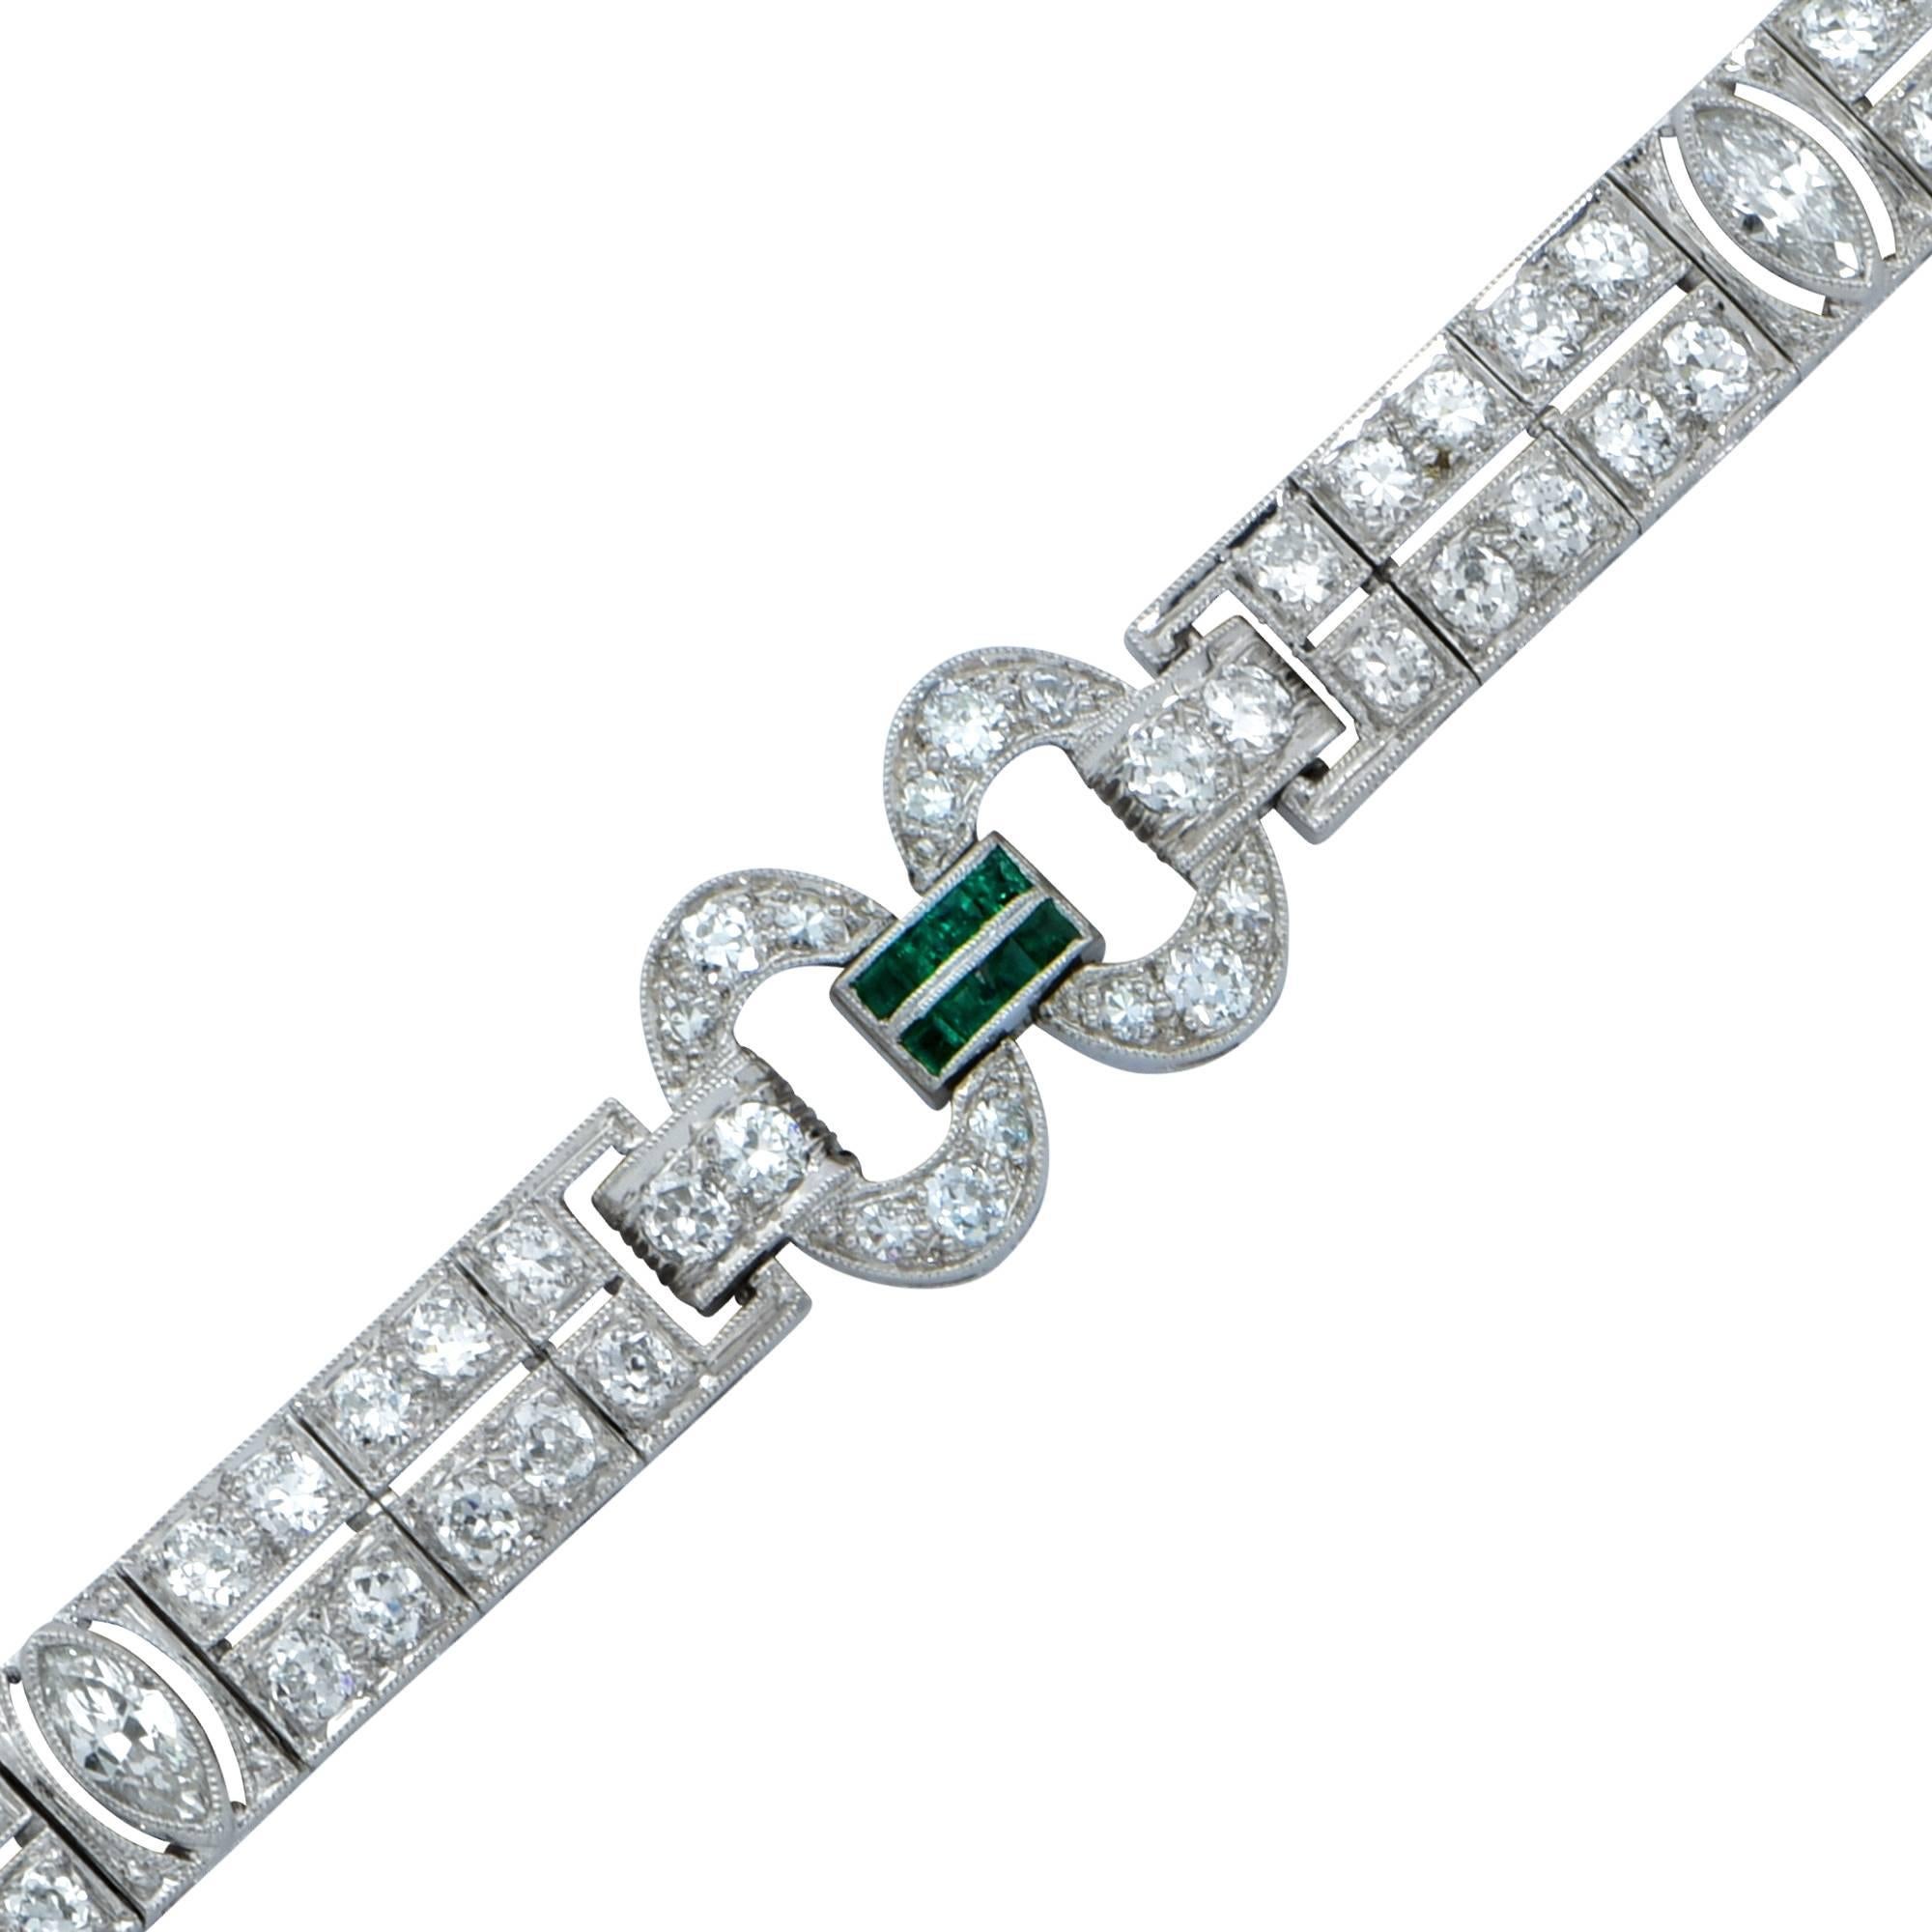 Platinum Art Deco bracelet featuring 3 marquise cut diamonds weighing .60cts total and 109 European cut and single cut diamonds weighing 4.40cts total G-H color VS clarity. The total diamond weight is approximately 5cts and this bracelet weighs 22.8